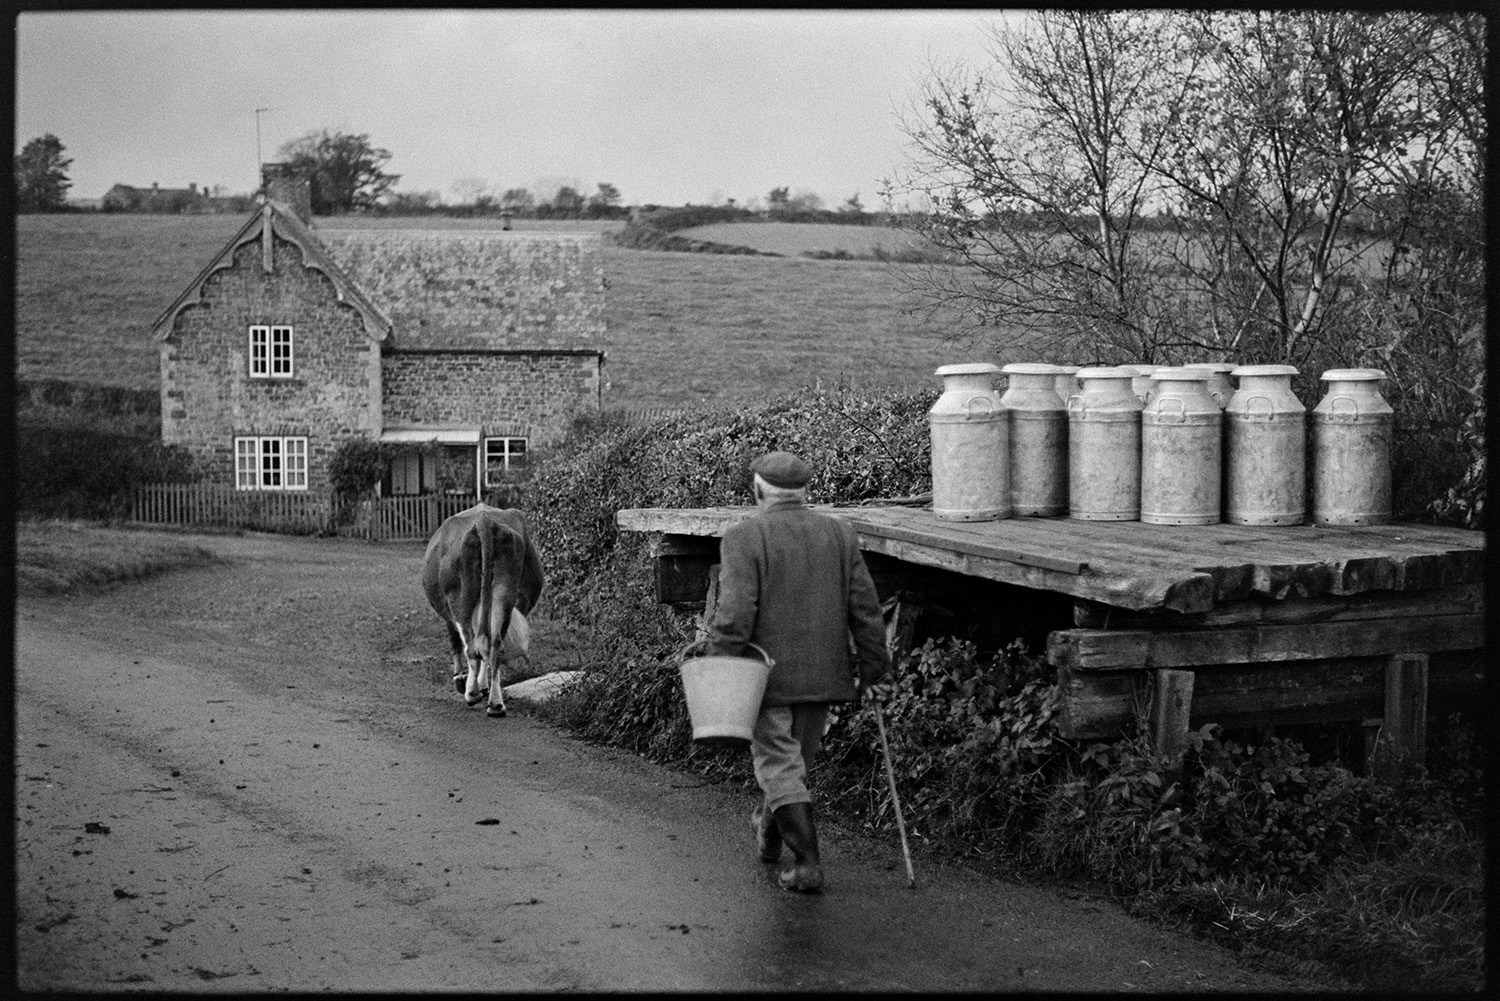 Man taking cow to be milked, milking by hand. 
[A man herding a cow along a road past a wooden milk churn stand with milk churns, at Hallcourt, Petrockstowe, to go to be milked. A house can be seen in the background.]